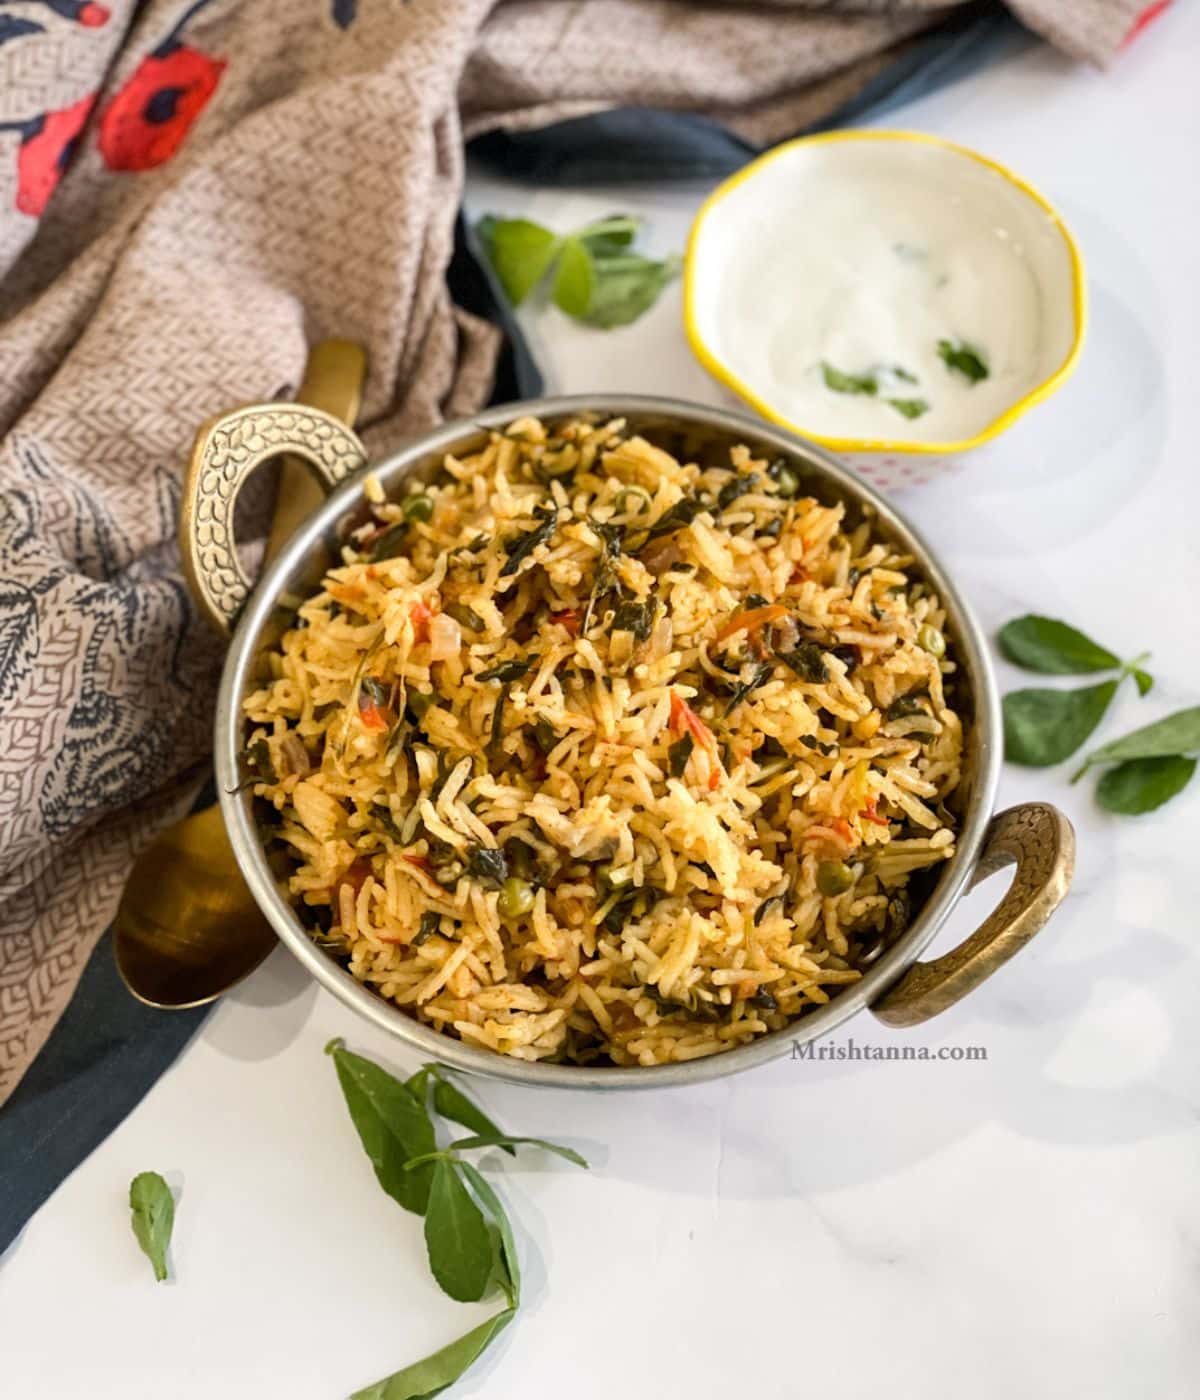 A bowl of methi rice is on the table along with bowl of raita.